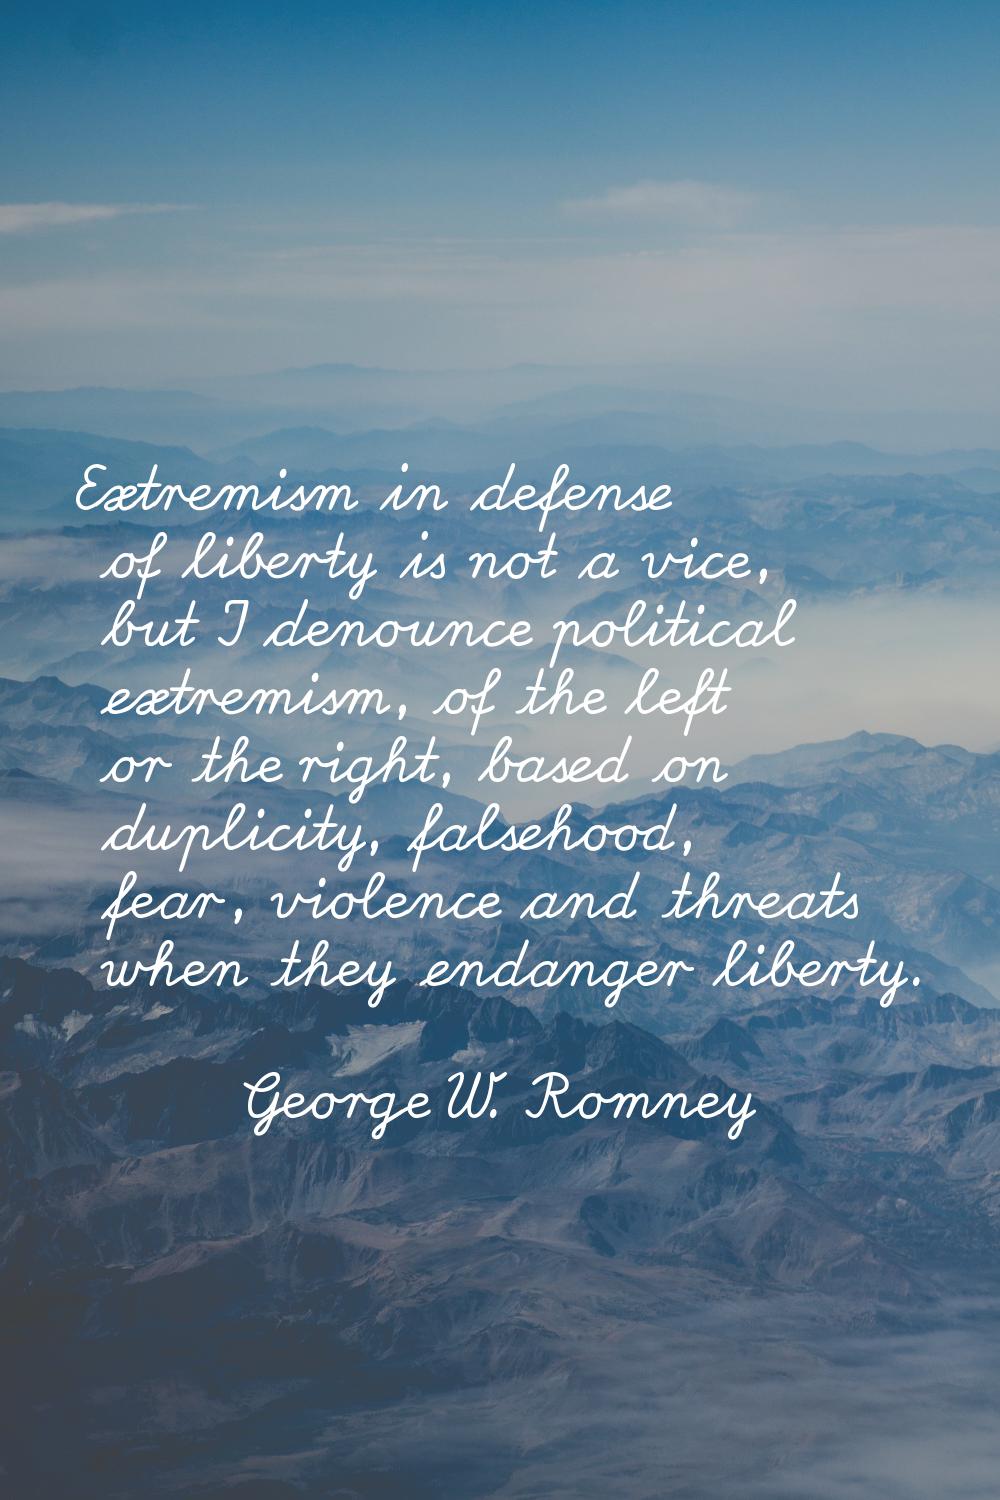 Extremism in defense of liberty is not a vice, but I denounce political extremism, of the left or t